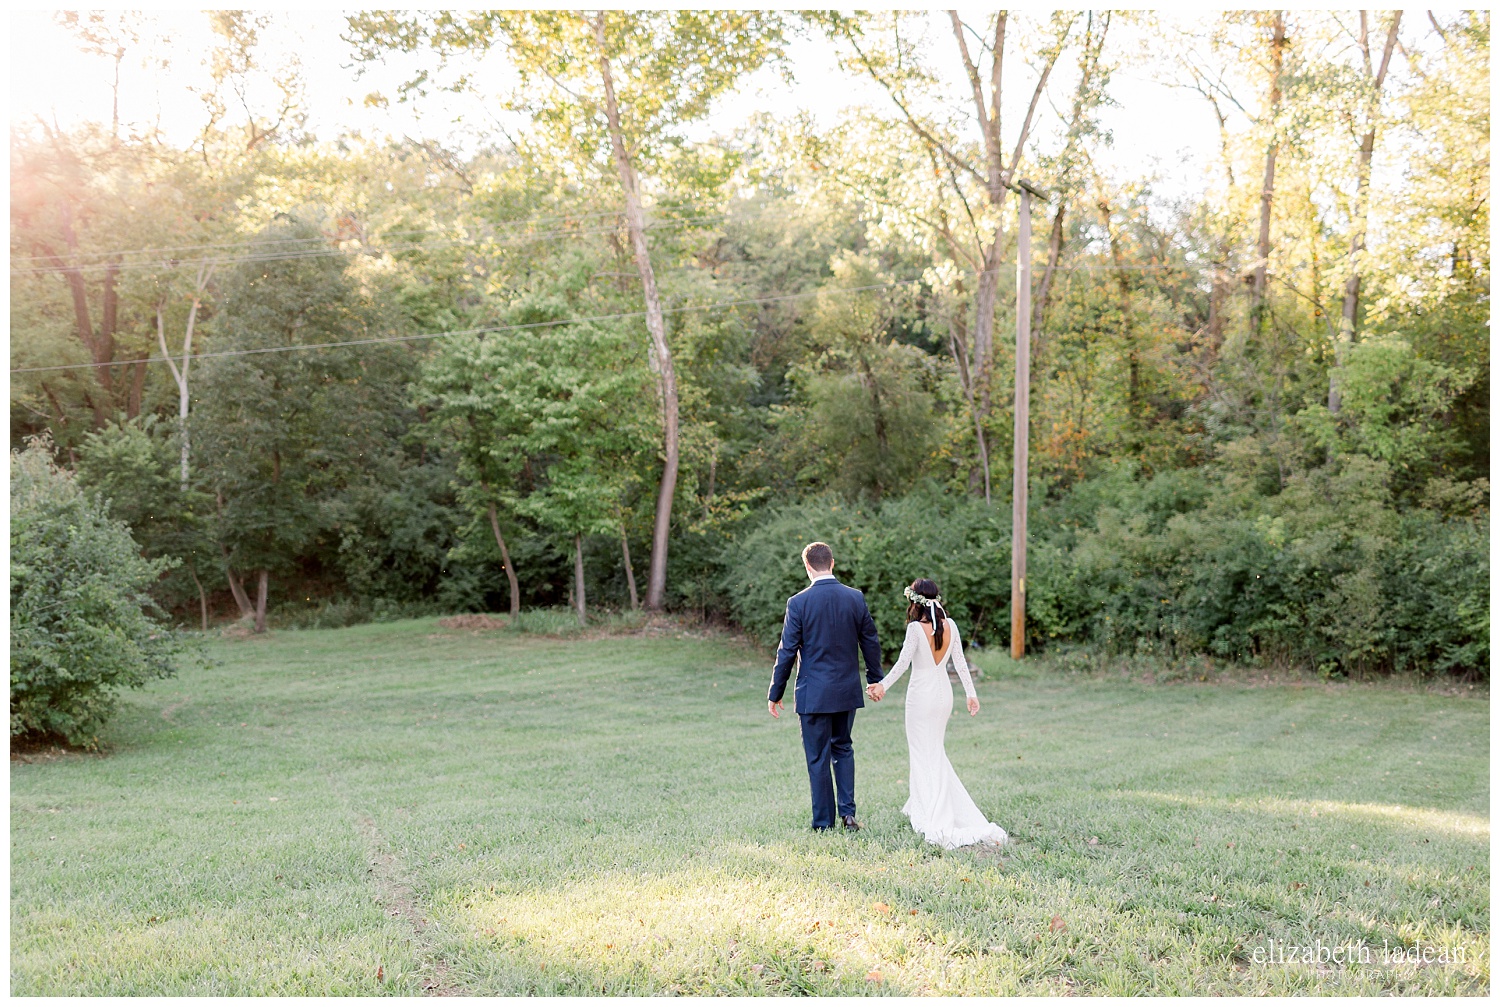 Willow-Creek-Blush-and-Blues-Outdoor-Wedding-Photography-S+Z2018-elizabeth-ladean-photography-photo_0602.jpg